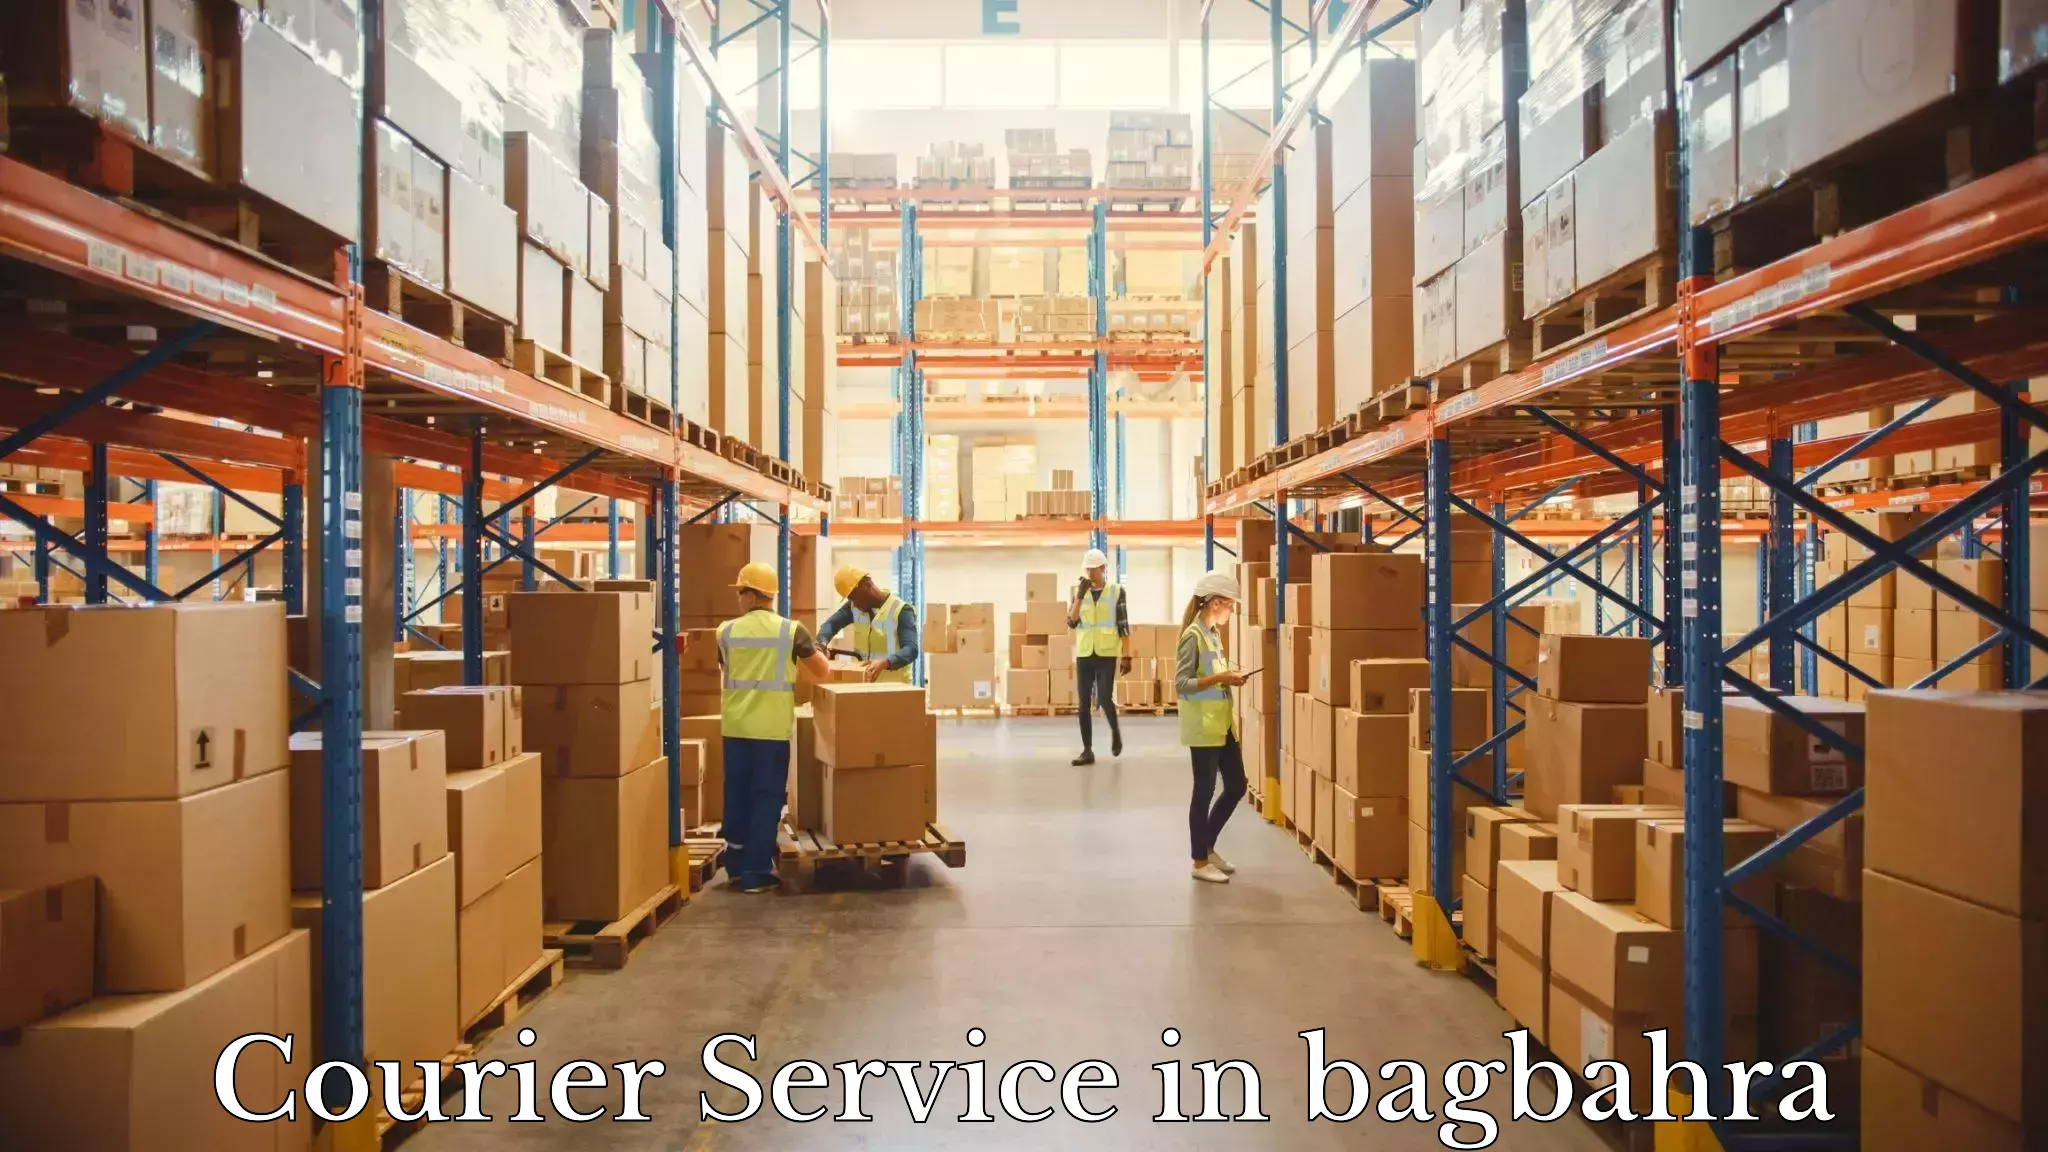 Parcel delivery in bagbahra